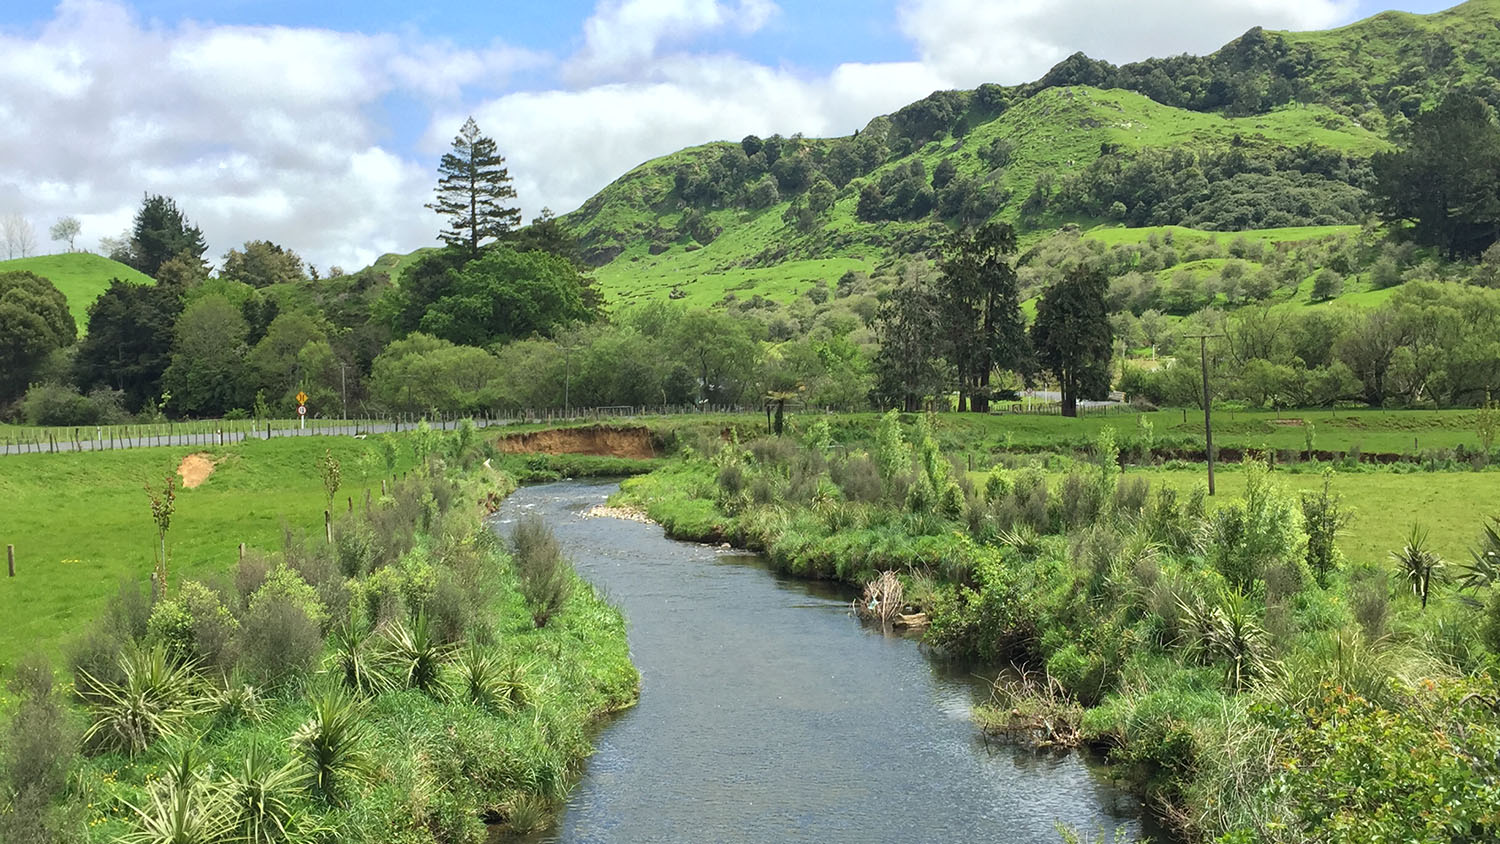 WHAT'S HAPPENING WITH FRESHWATER FARM PLANS? The Freshwater Farm Plan Regulations came into effect in parts of the Waikato and Southland from 1 August 2023. Other regions will follow over the next two years. 